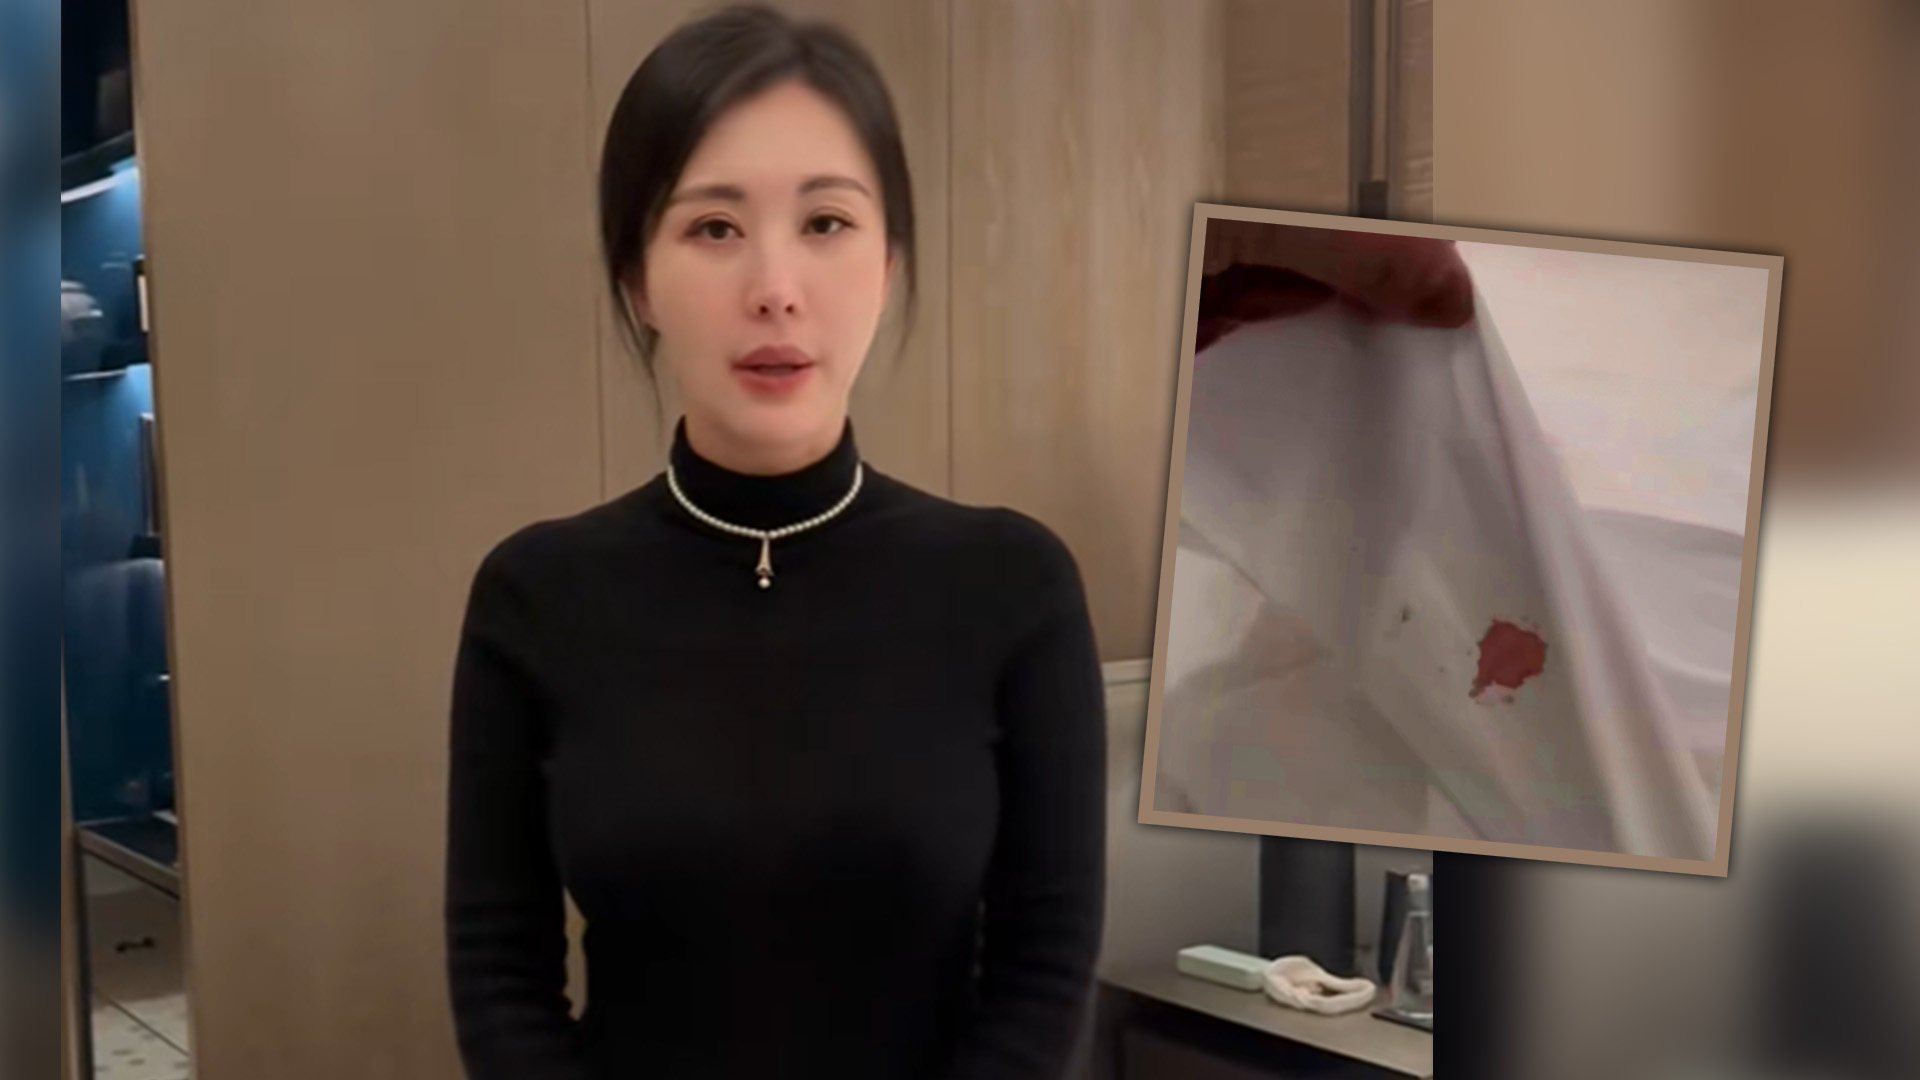 A top actress in China has spoken of her shock after discovering a blood-stained sheet and filthy toilet in her luxury hotel room, then being treated shabbily by staff when she complained.
Photo: SCMP composite/Douyin